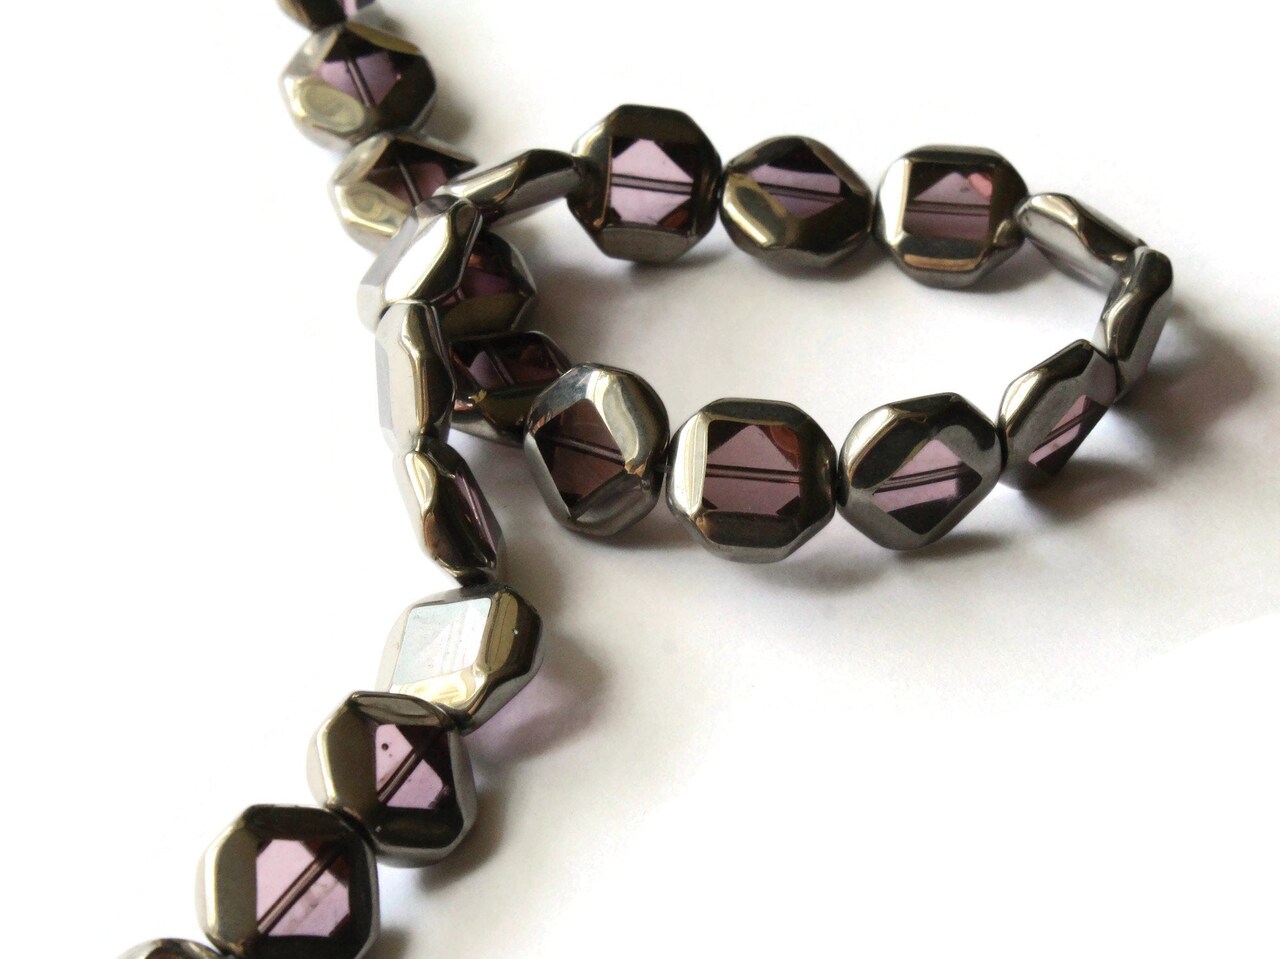 22 14mm Silver Rimmed Glass Beads Pink Octagon Window Beads